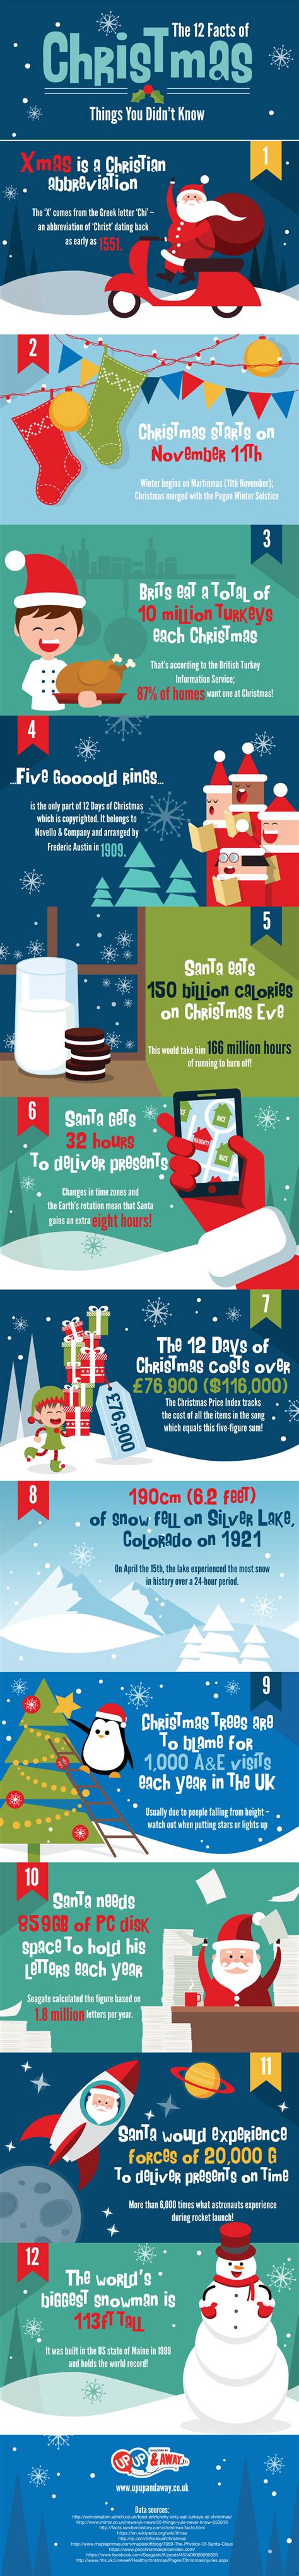 facts about christmas